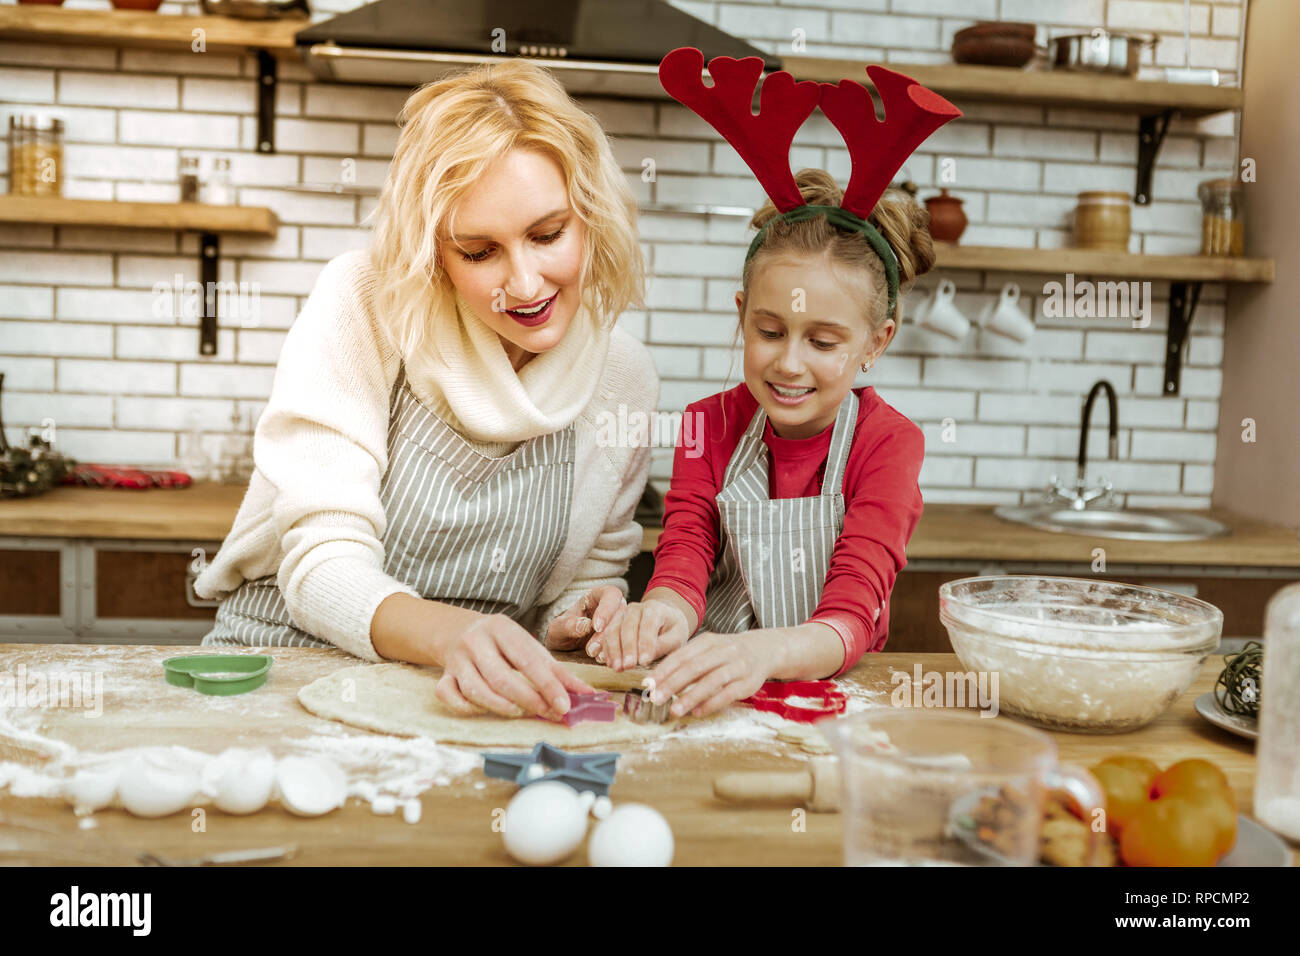 Blonde woman being happy with time spending with her daughter Stock Photo